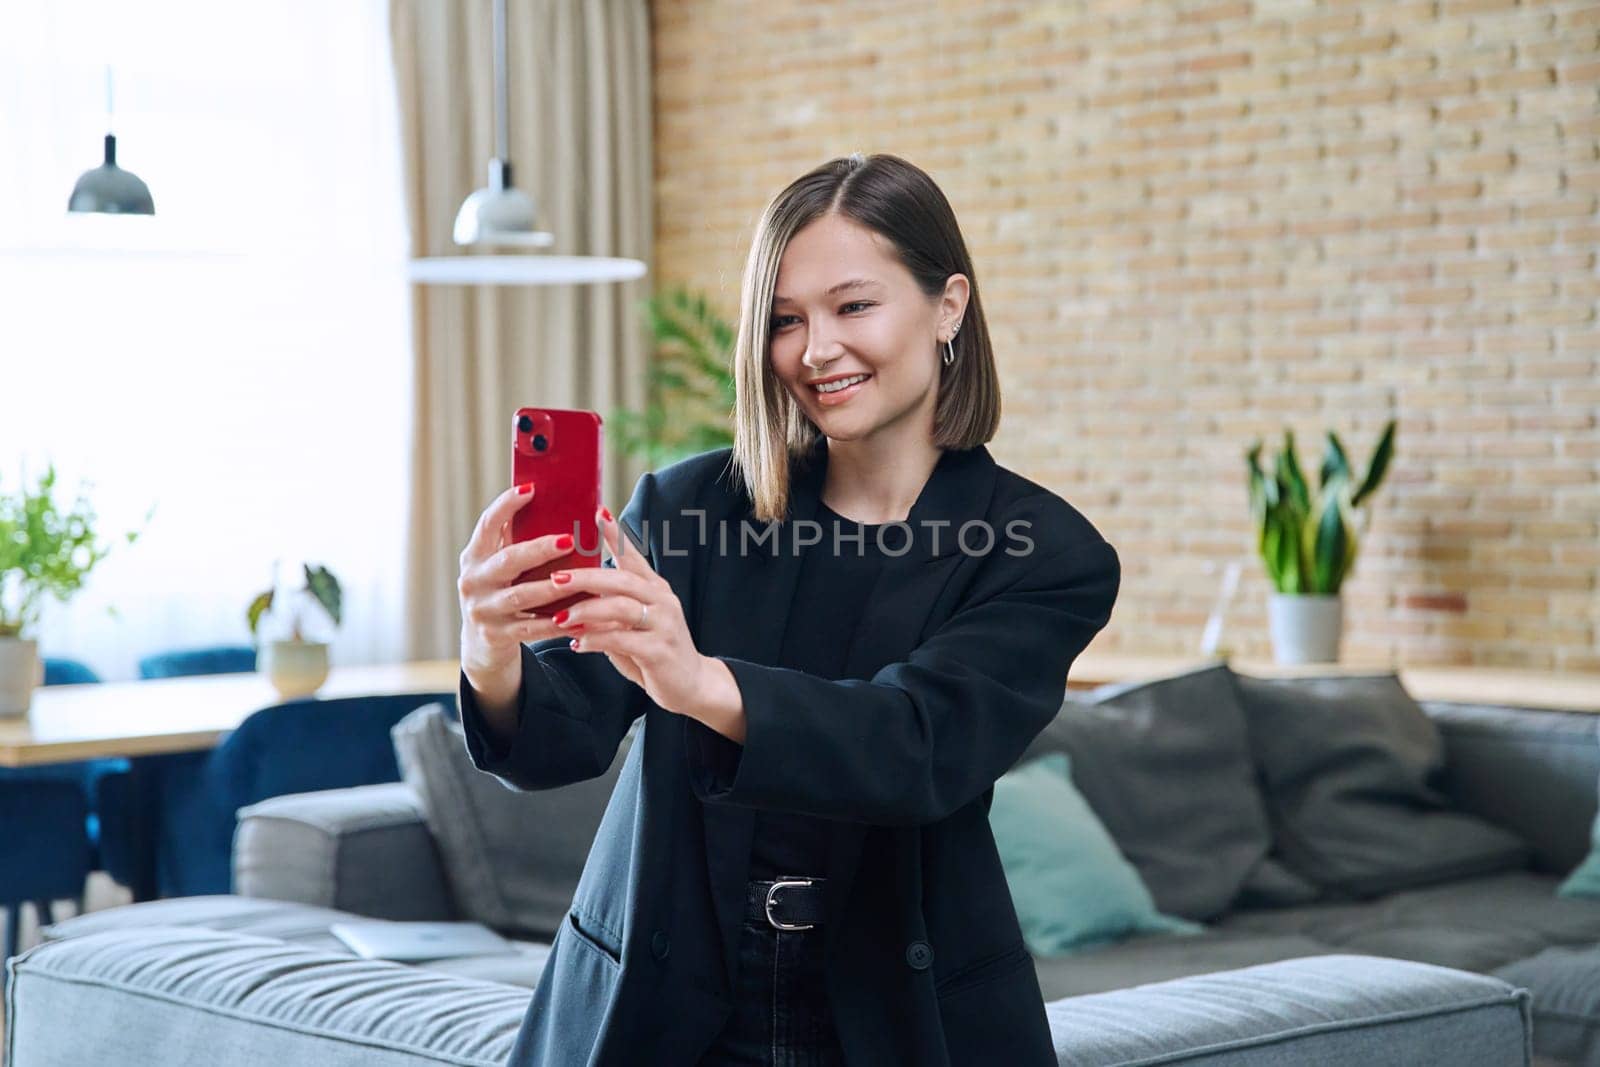 Young smiling joyful happy woman sitting on the sofa in the living room having a video call chat conference using a smartphone. Communication, leisure, home, lifestyle, youth, technology concept